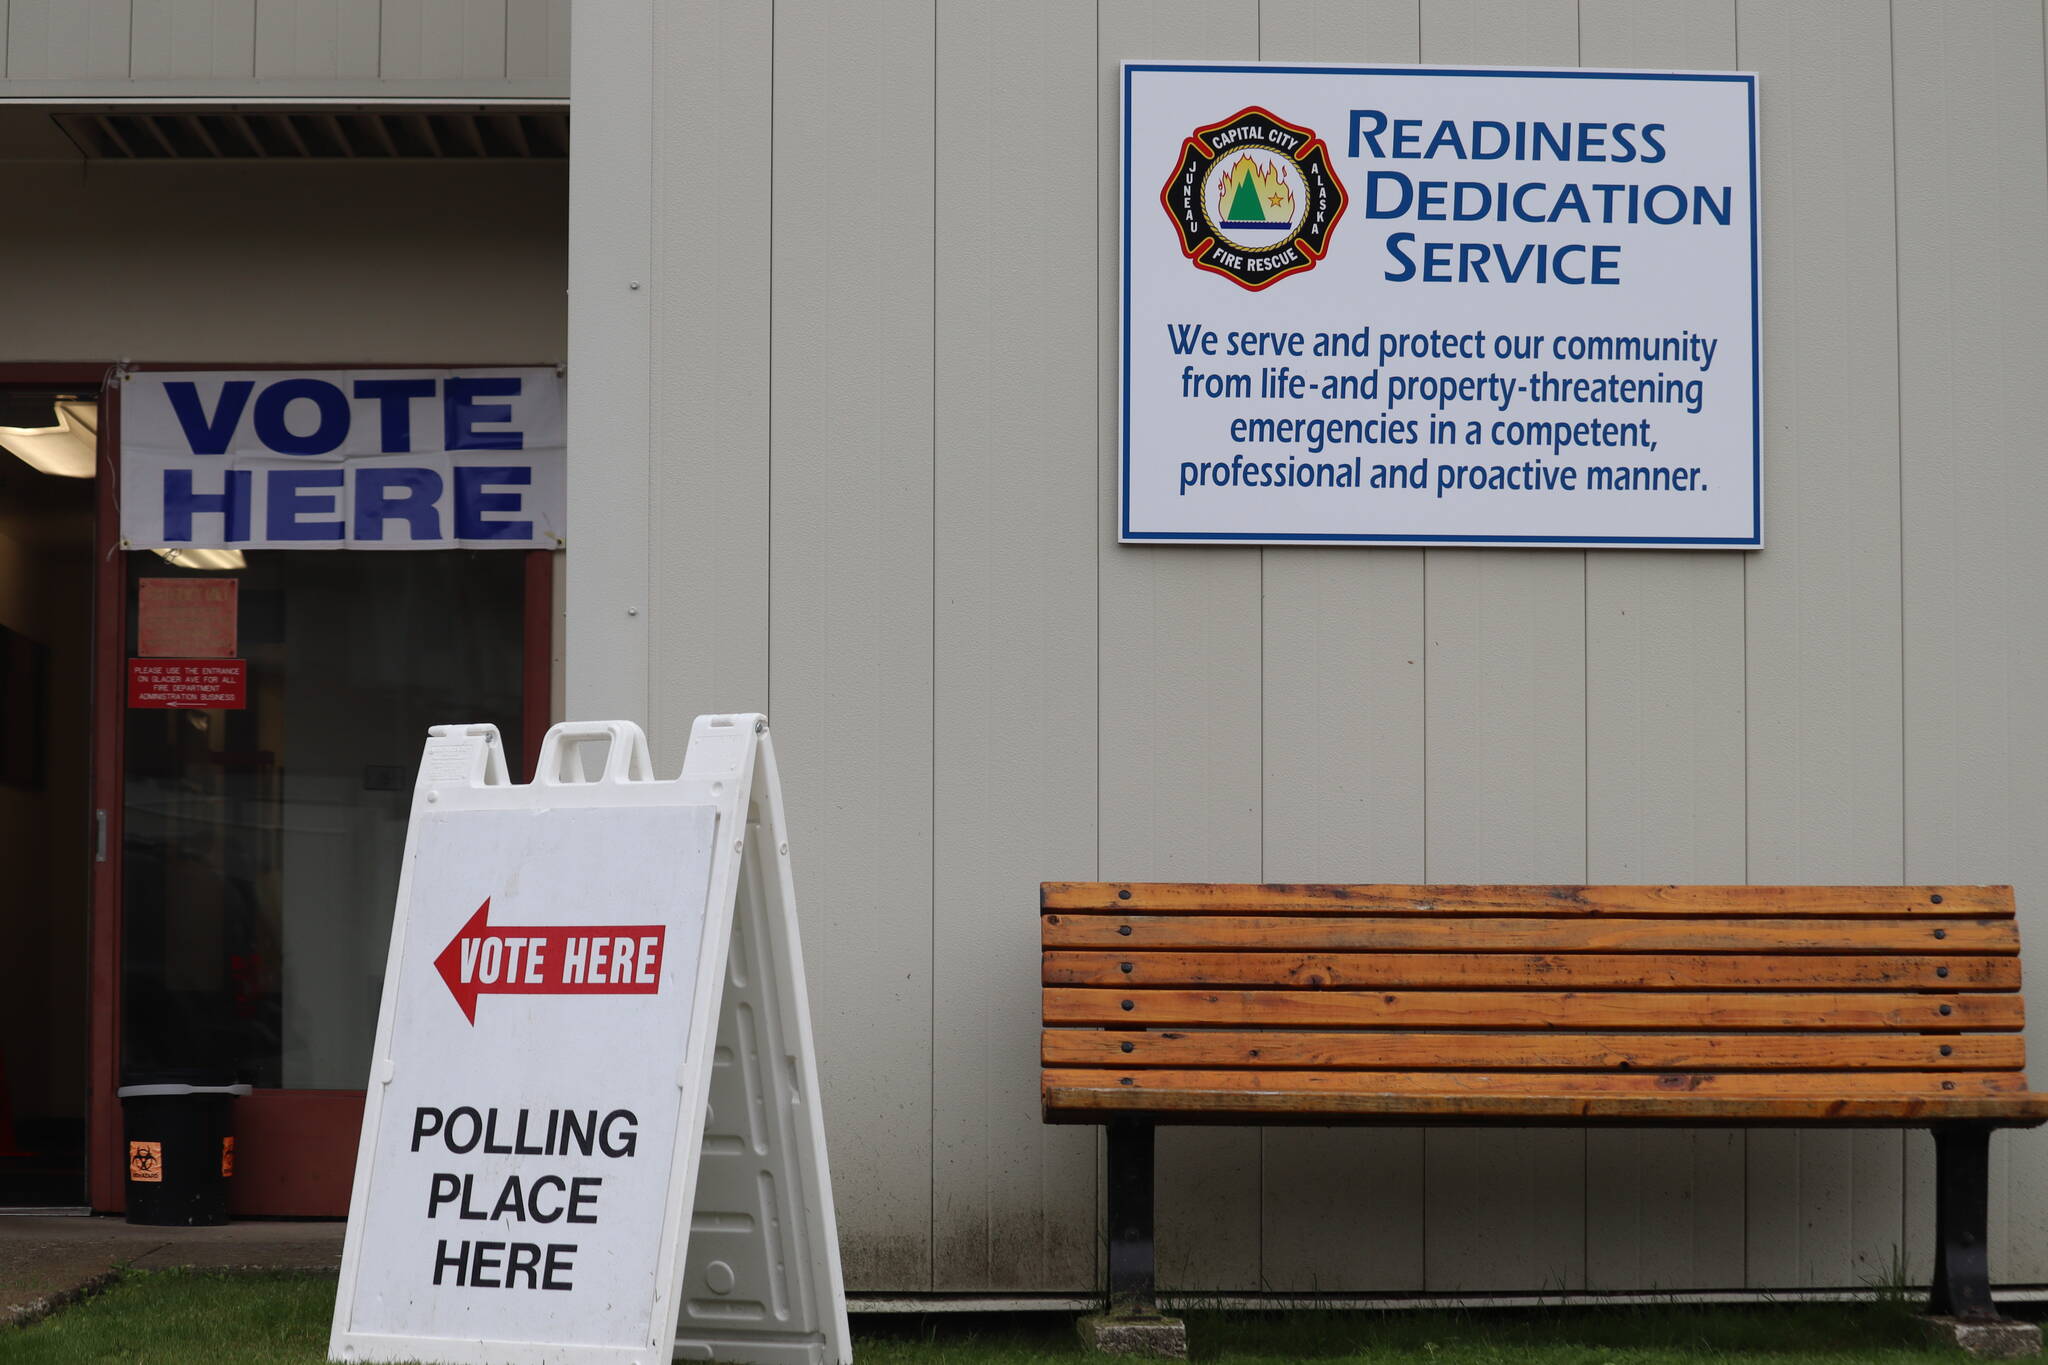 Juneau Fire Station at 820 Glacier Avenue welcomes surrounding north Douglas neighborhoods to vast votes Tuesday morning for Alaska’s primary election. (Jonson Kuhn / Juneau Empire)